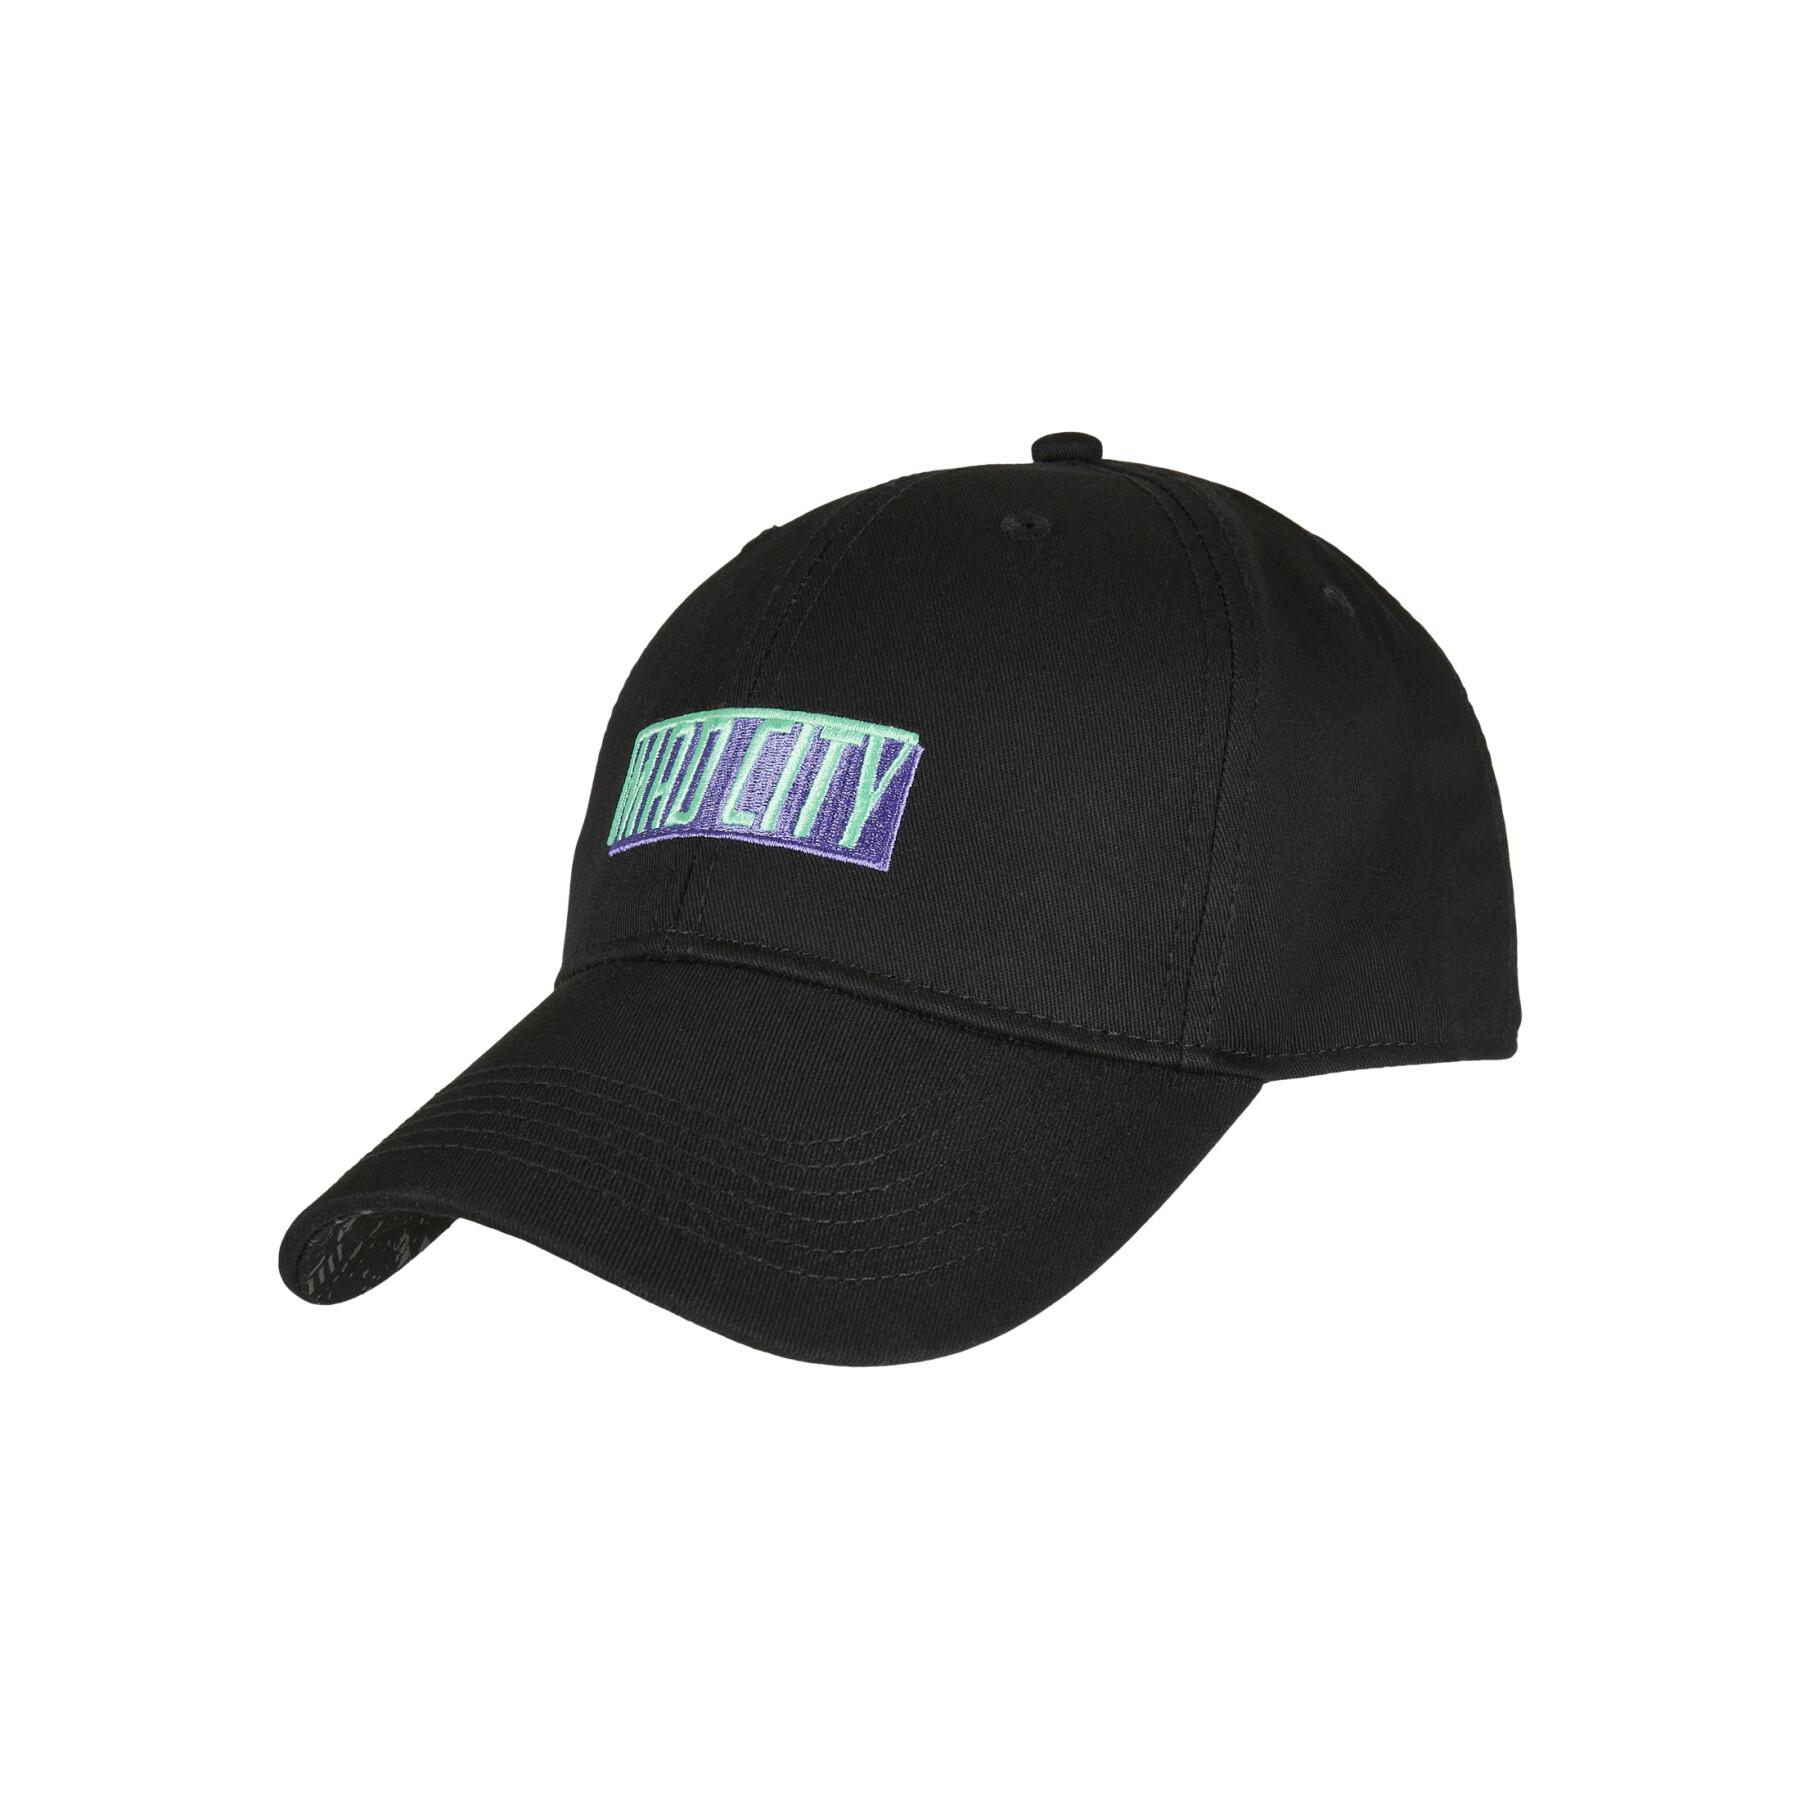 Gorra Cayler & Sons mad city curved